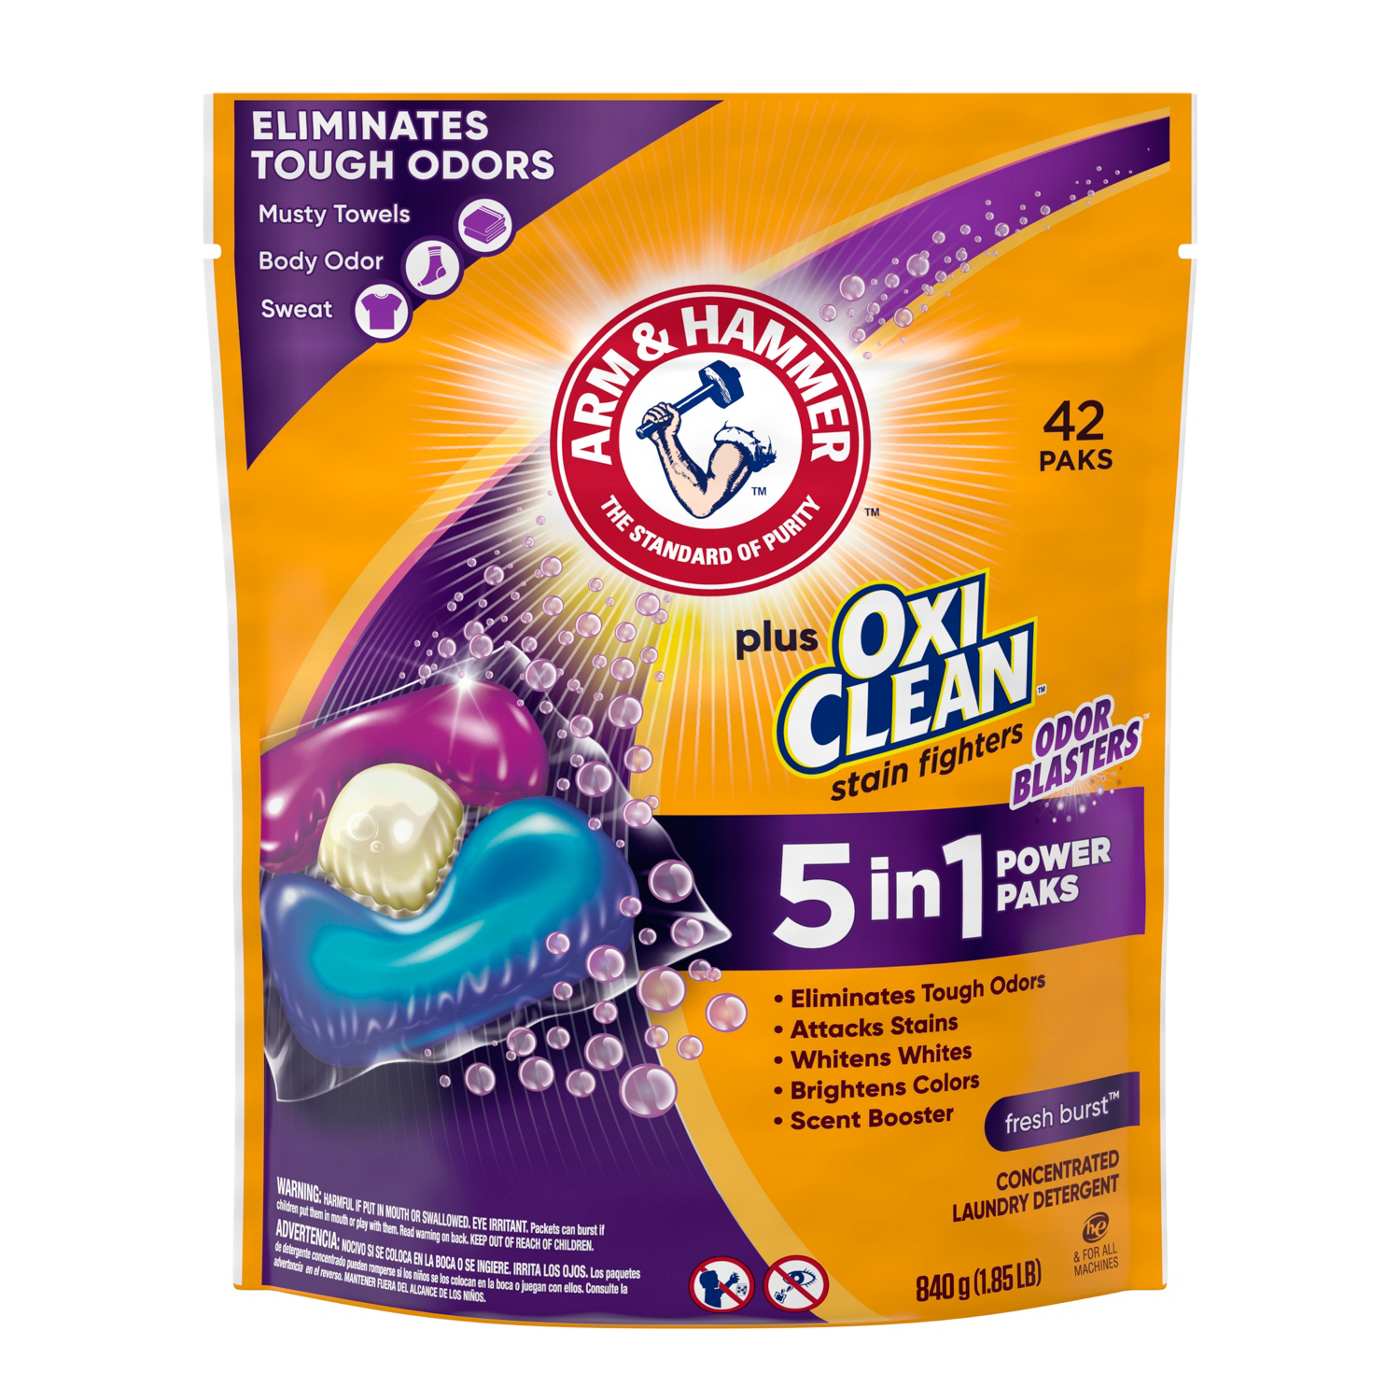 Arm & Hammer Plus Oxi Clean Odor Blasters HE Laundry Detergent Pacs - Fresh Burst; image 1 of 4